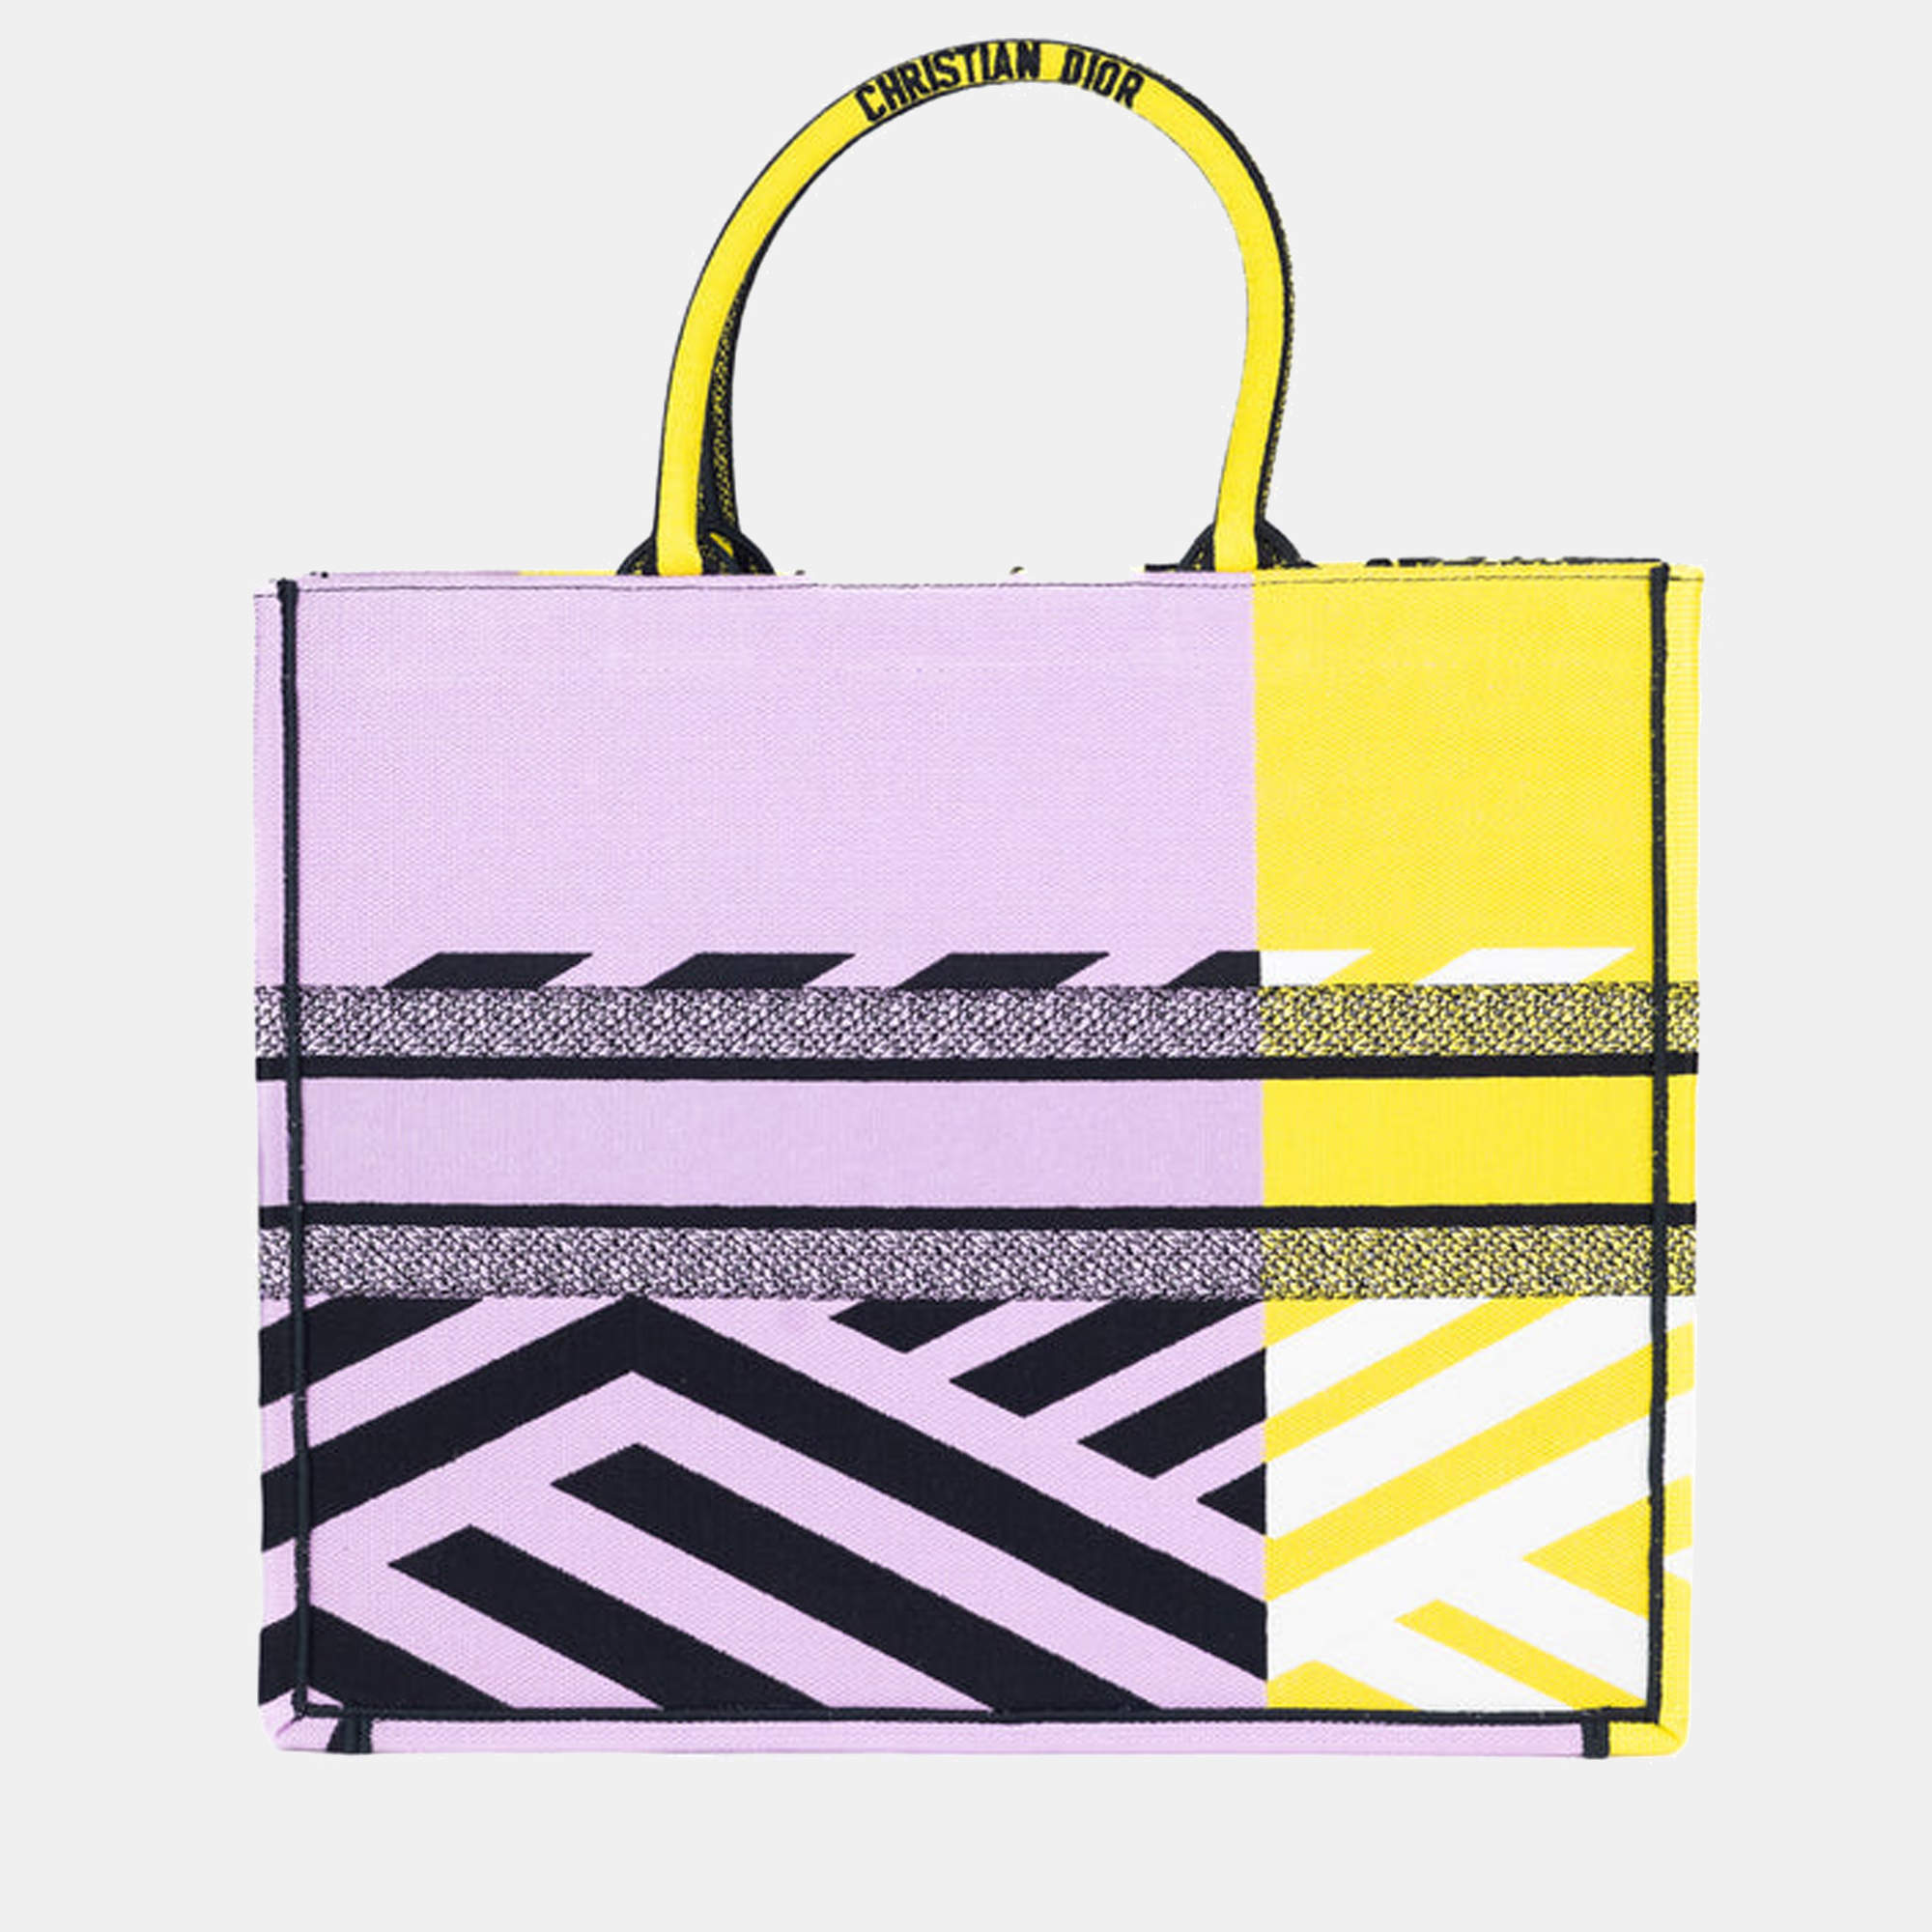 Exclusive] Dior Large book tote in bright yellow and pink D-jungle